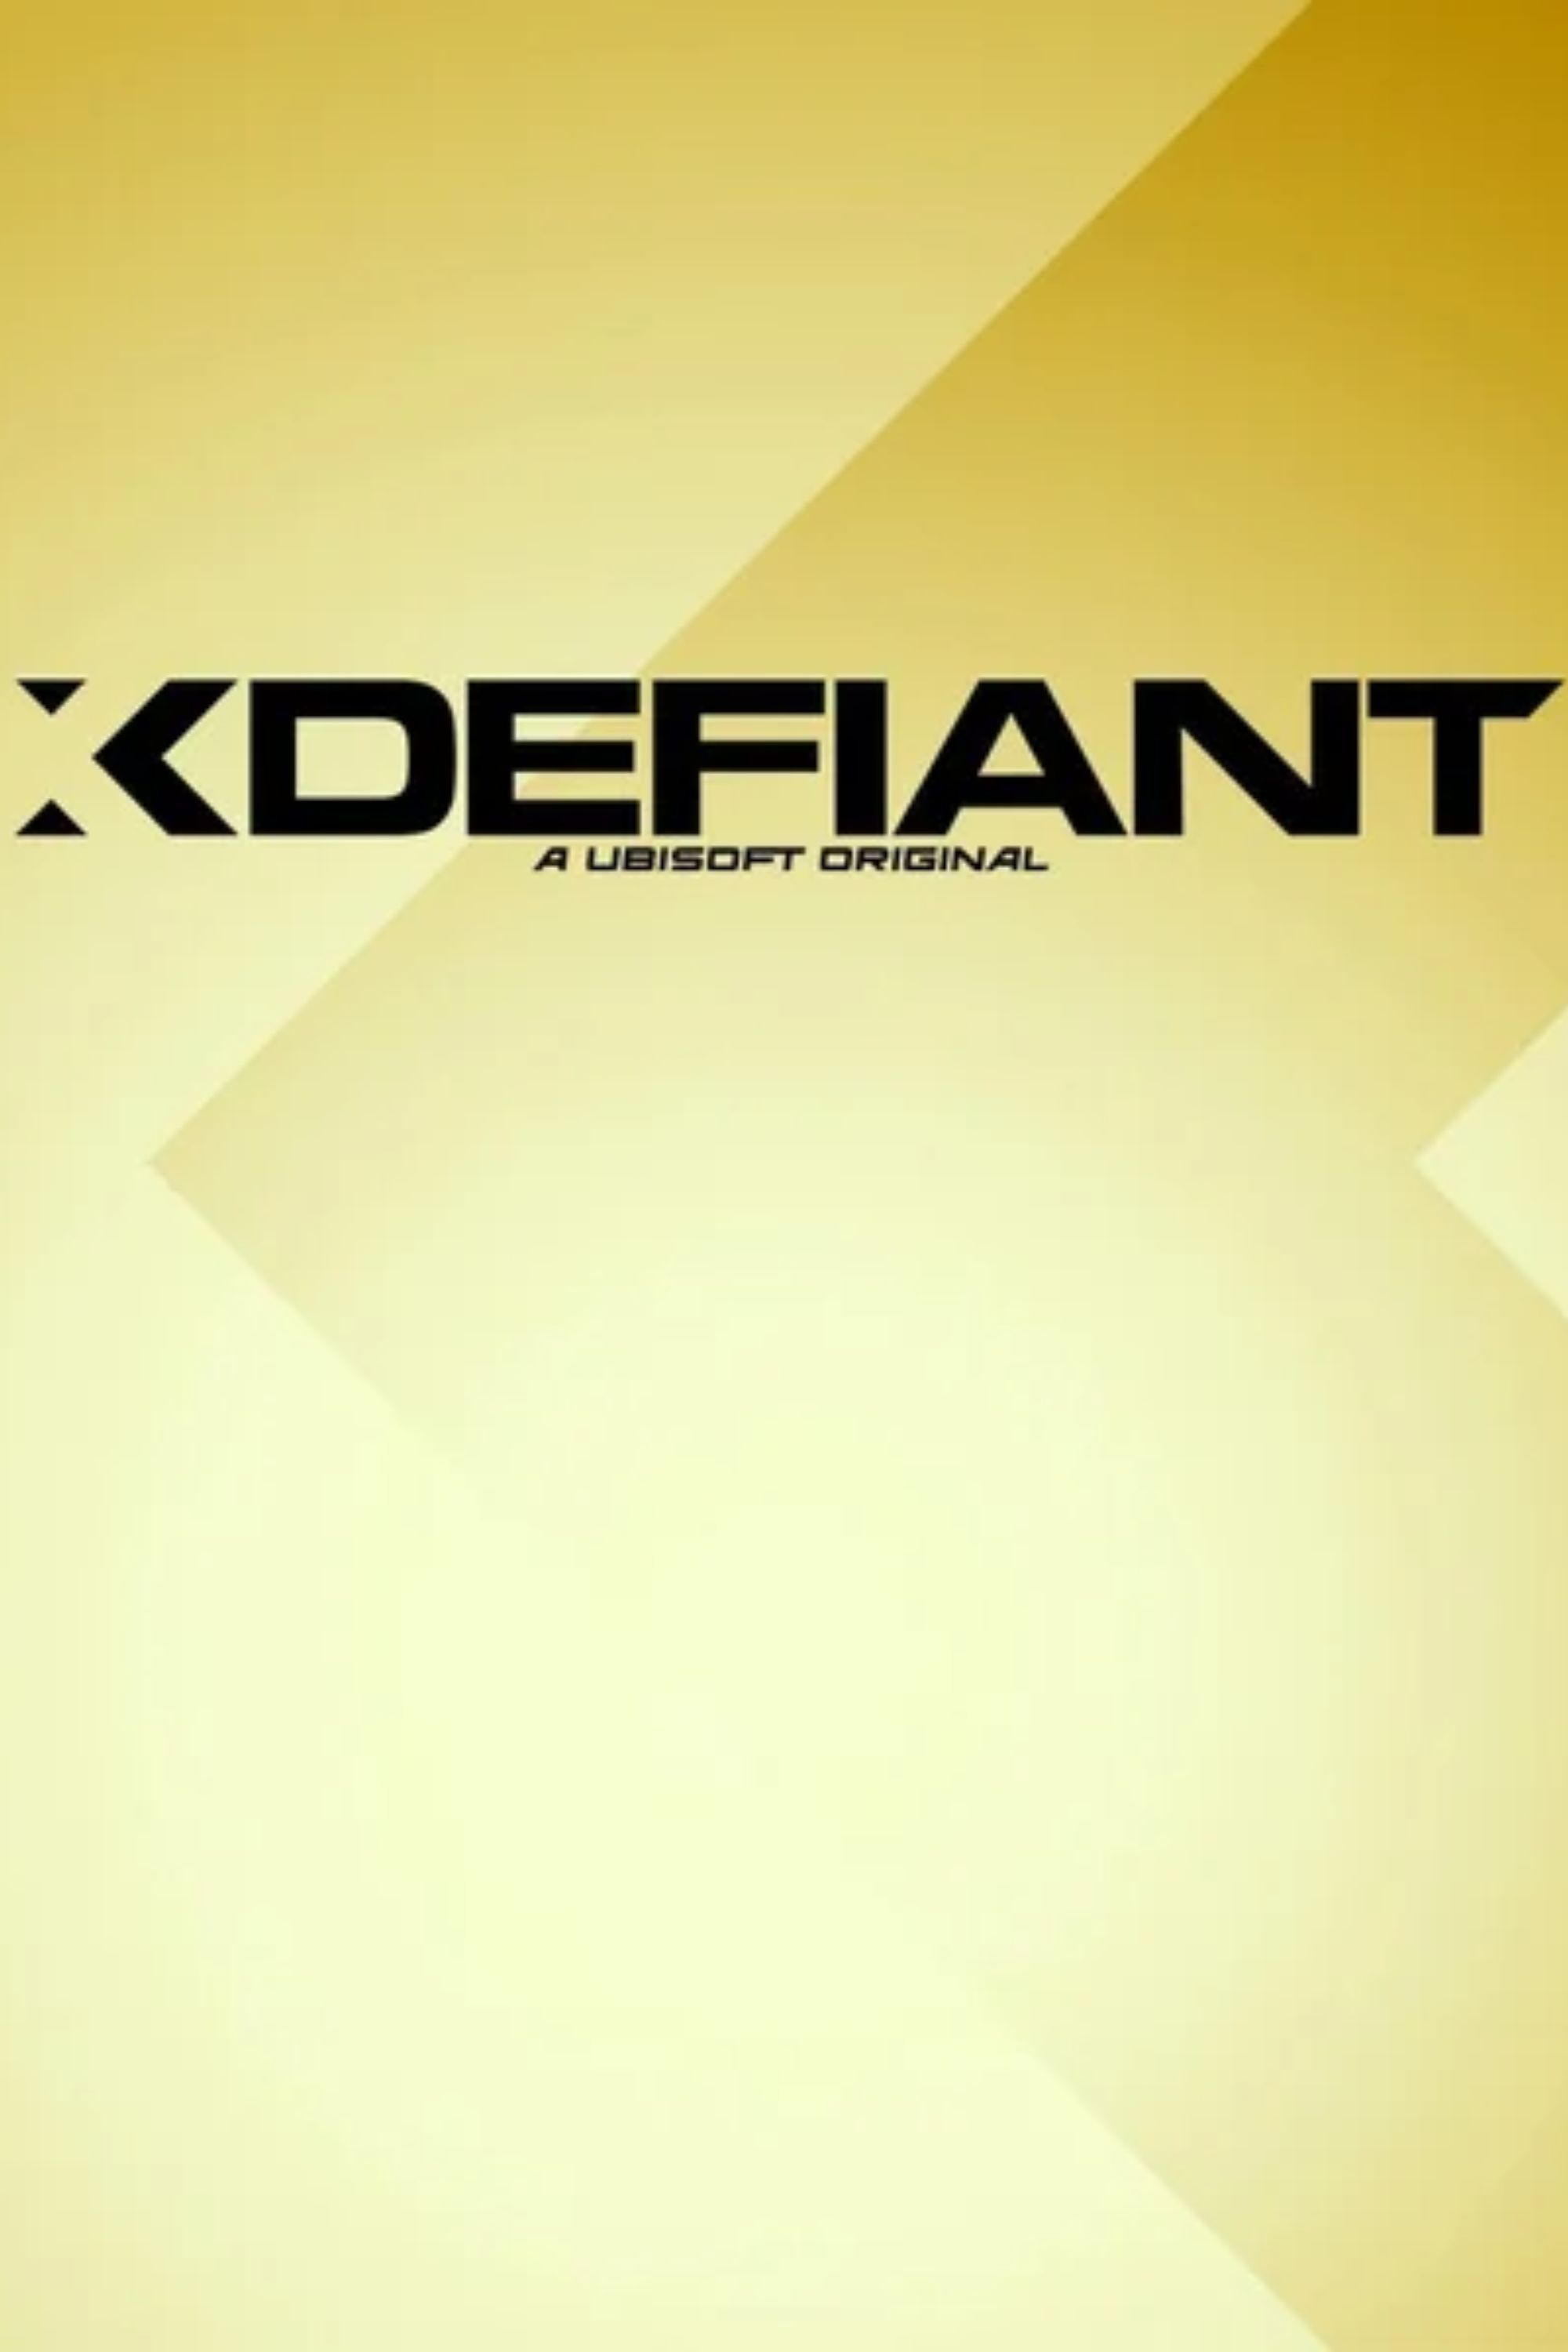 xdefiant tag image